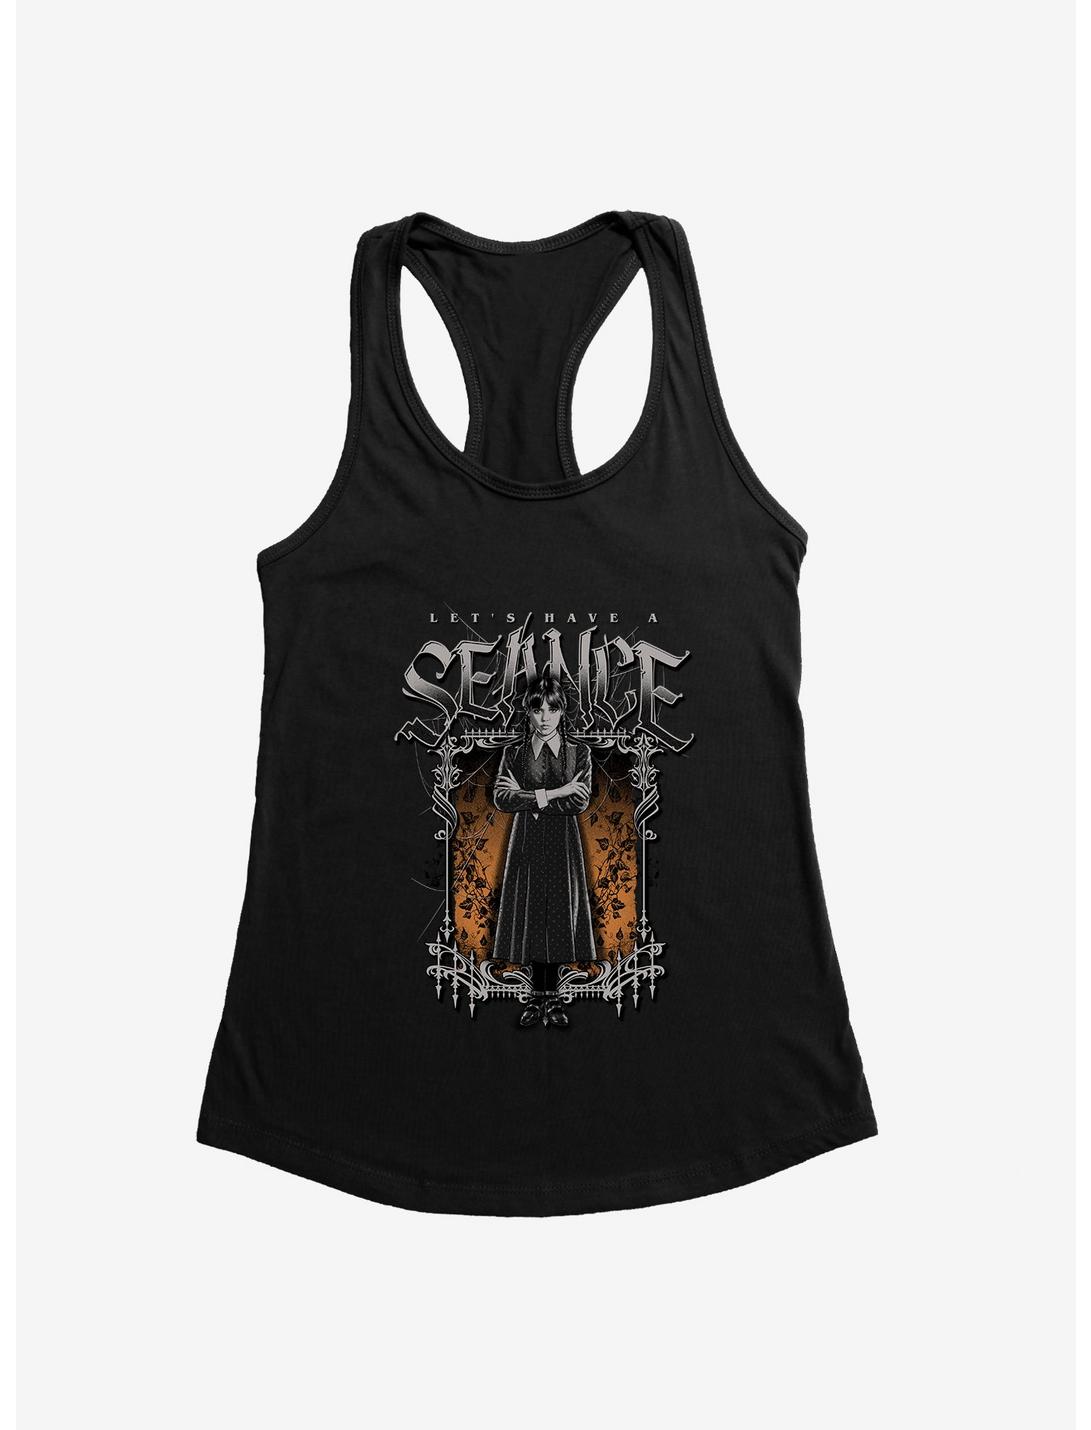 Wednesday Let's Have A Seance Girls Tank, BLACK, hi-res